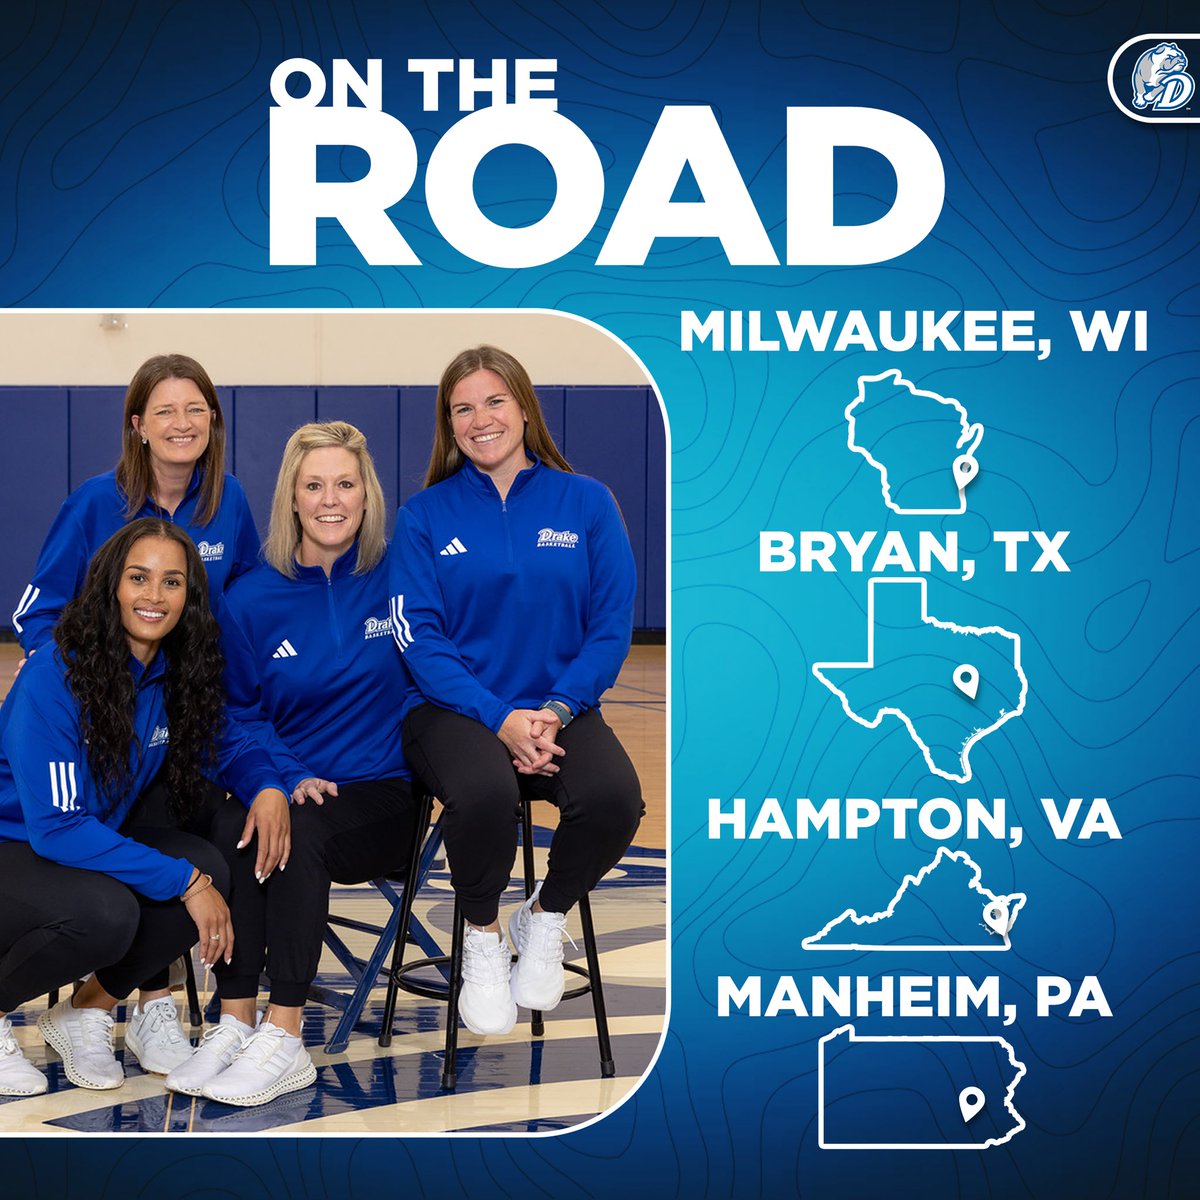 Our staff is hitting the road this weekend looking for future Bulldogs! 👀 #BeBlue